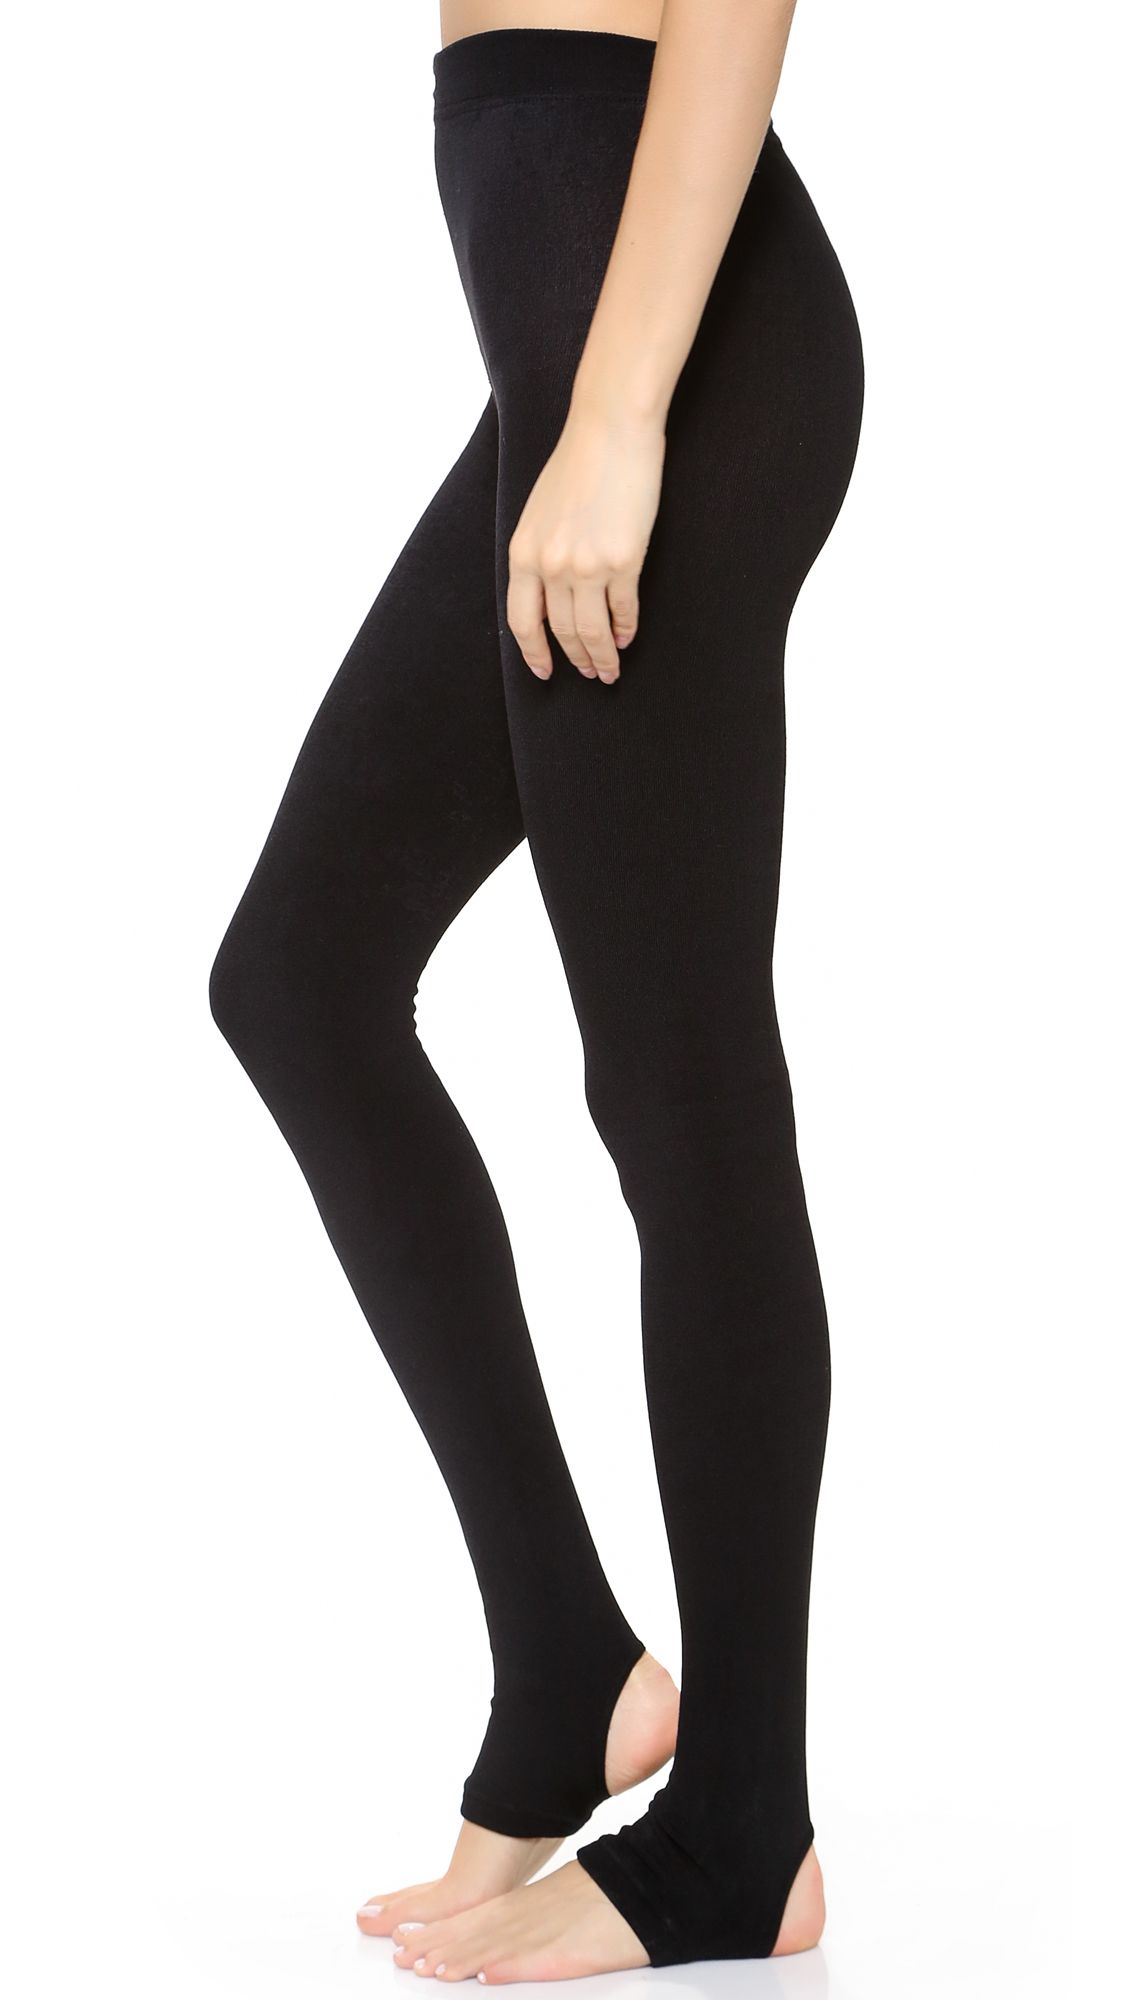 Fleece Lined Tights with Stirrup | Shopbop